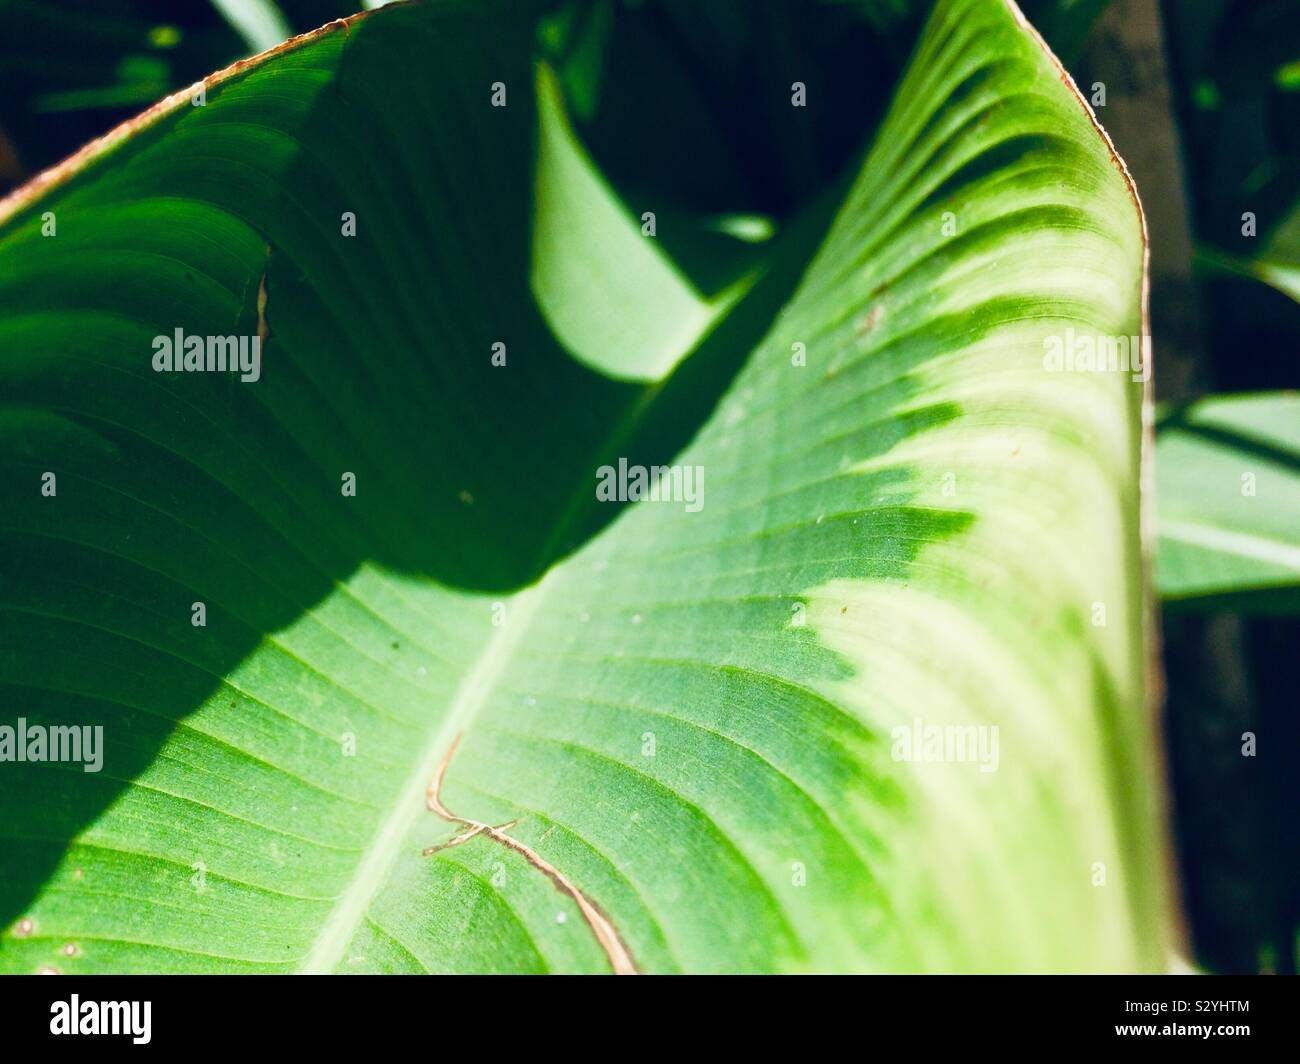 Banana leaves close up zoom in view Stock Photo